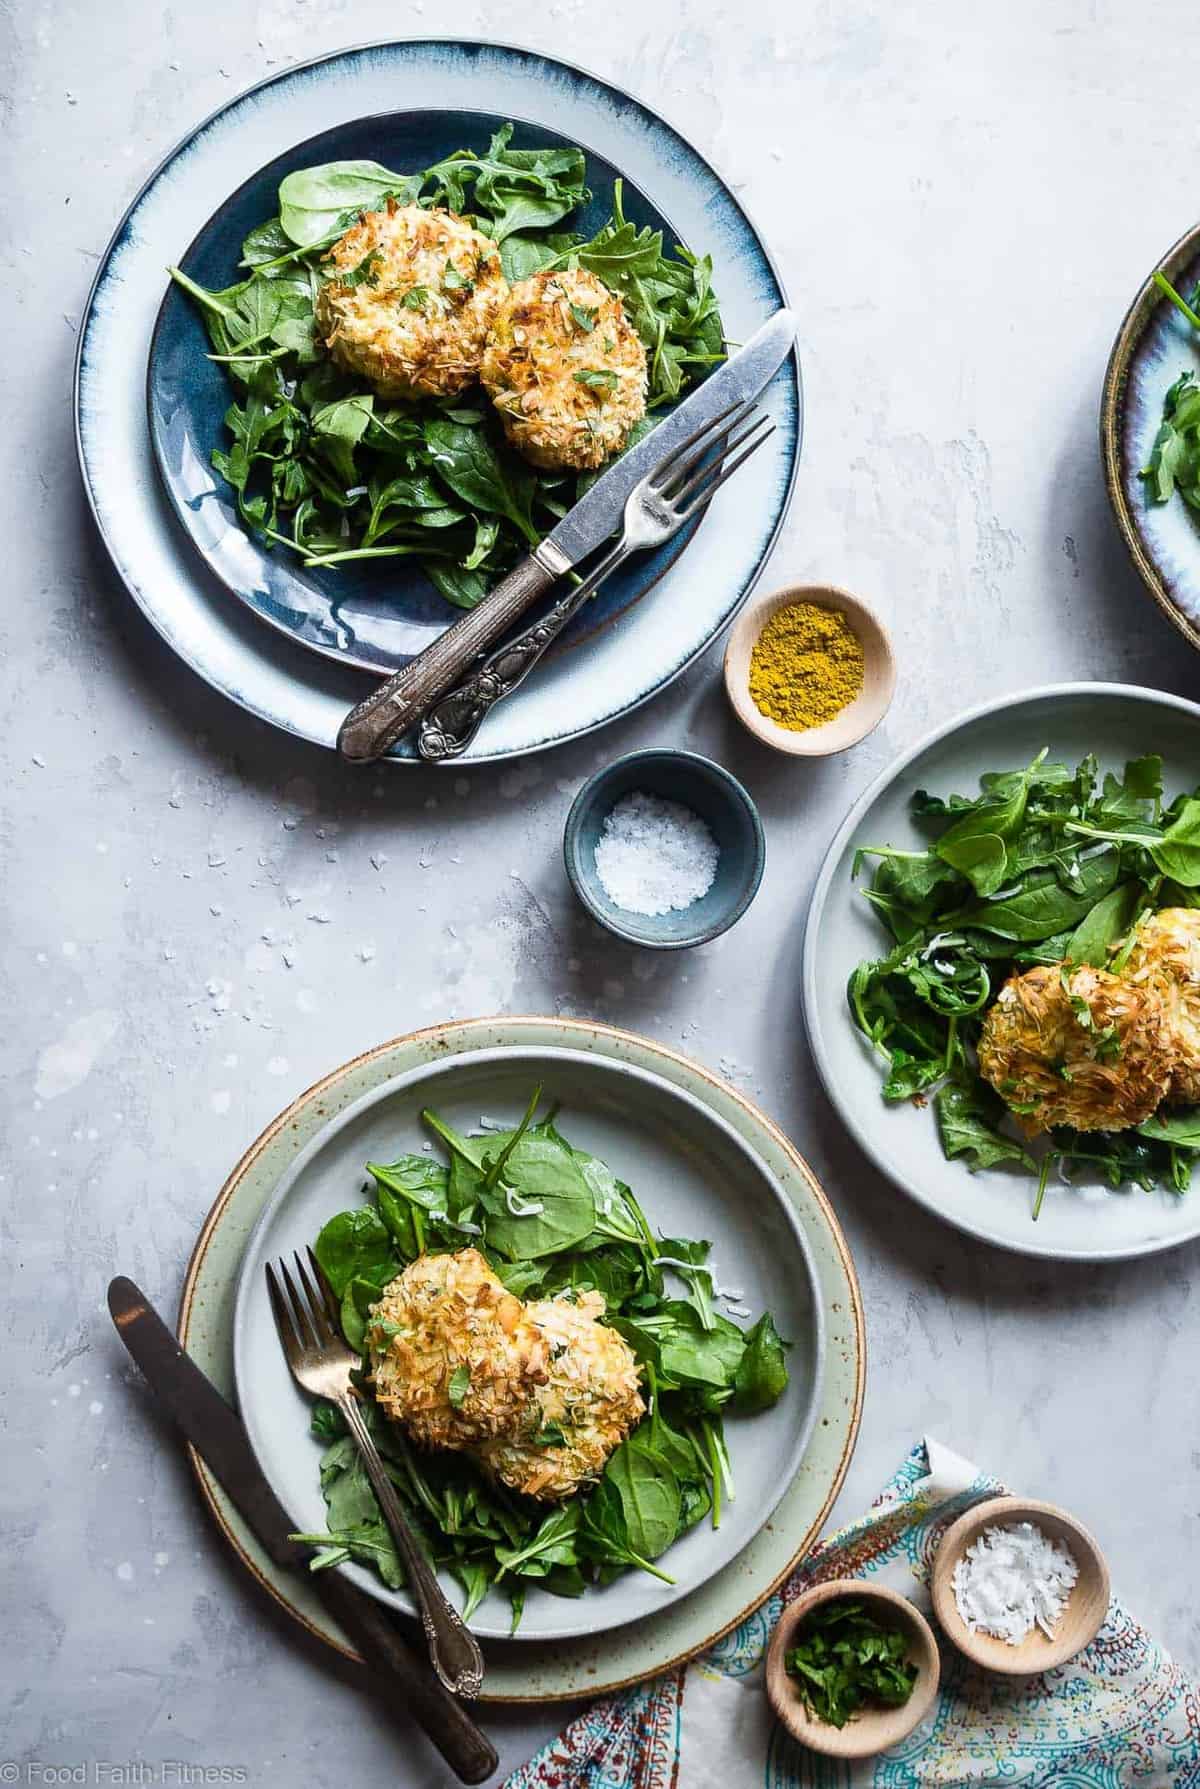 Whole30 Air Fryer Coconut Curry Salmon Cakes - These gluten free salmon cakes are made in the air fryer so they're juicy and SO crispy without all the oil! A healthy, paleo friendly, grain/dairy/sugar free meal that is low carb! | #Foodfaithfitness | #glutenfree #paleo #whole30 #airfryer #lowcarb